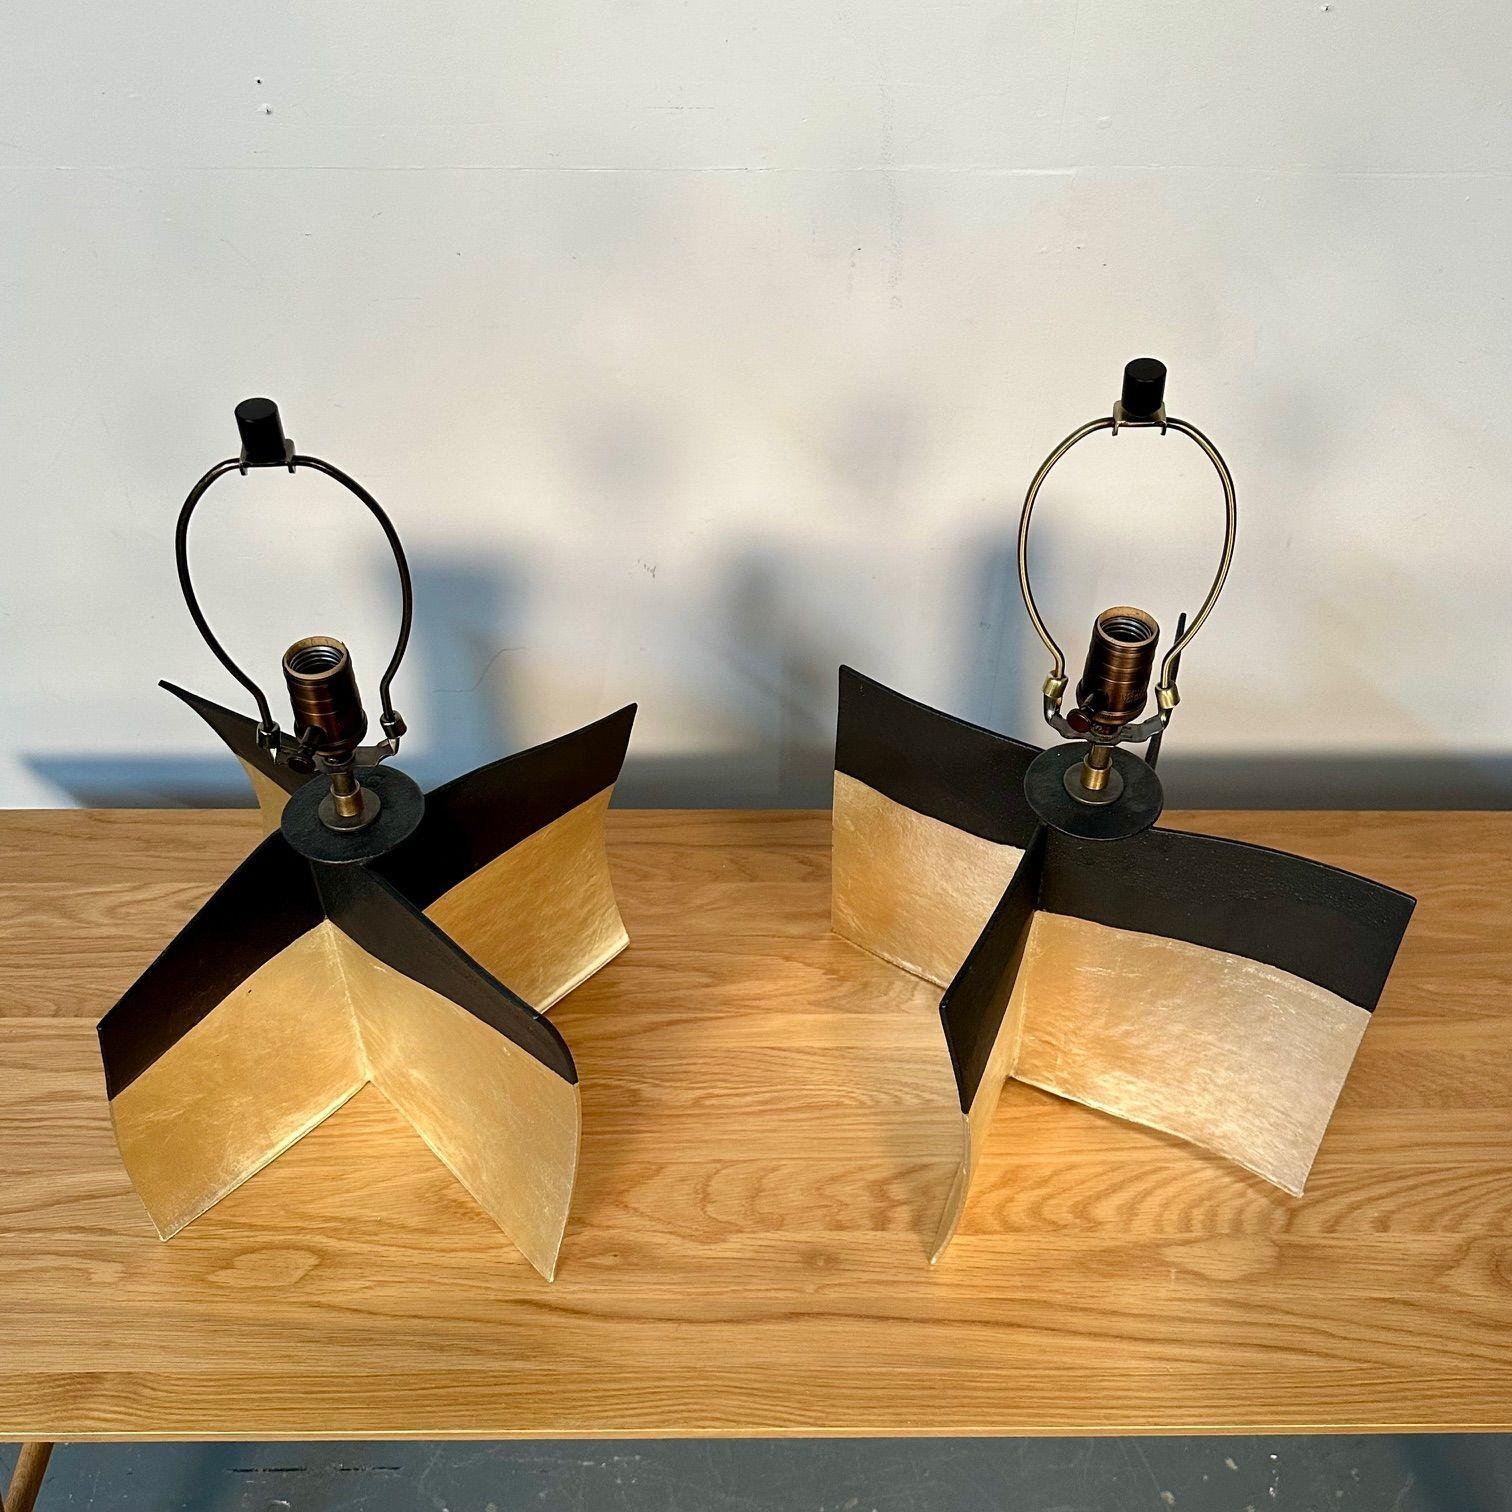 Dumais Made, Contemporary, Ceramic Croisillon Table Lamps, Gold Glaze, 2021 In New Condition For Sale In Stamford, CT